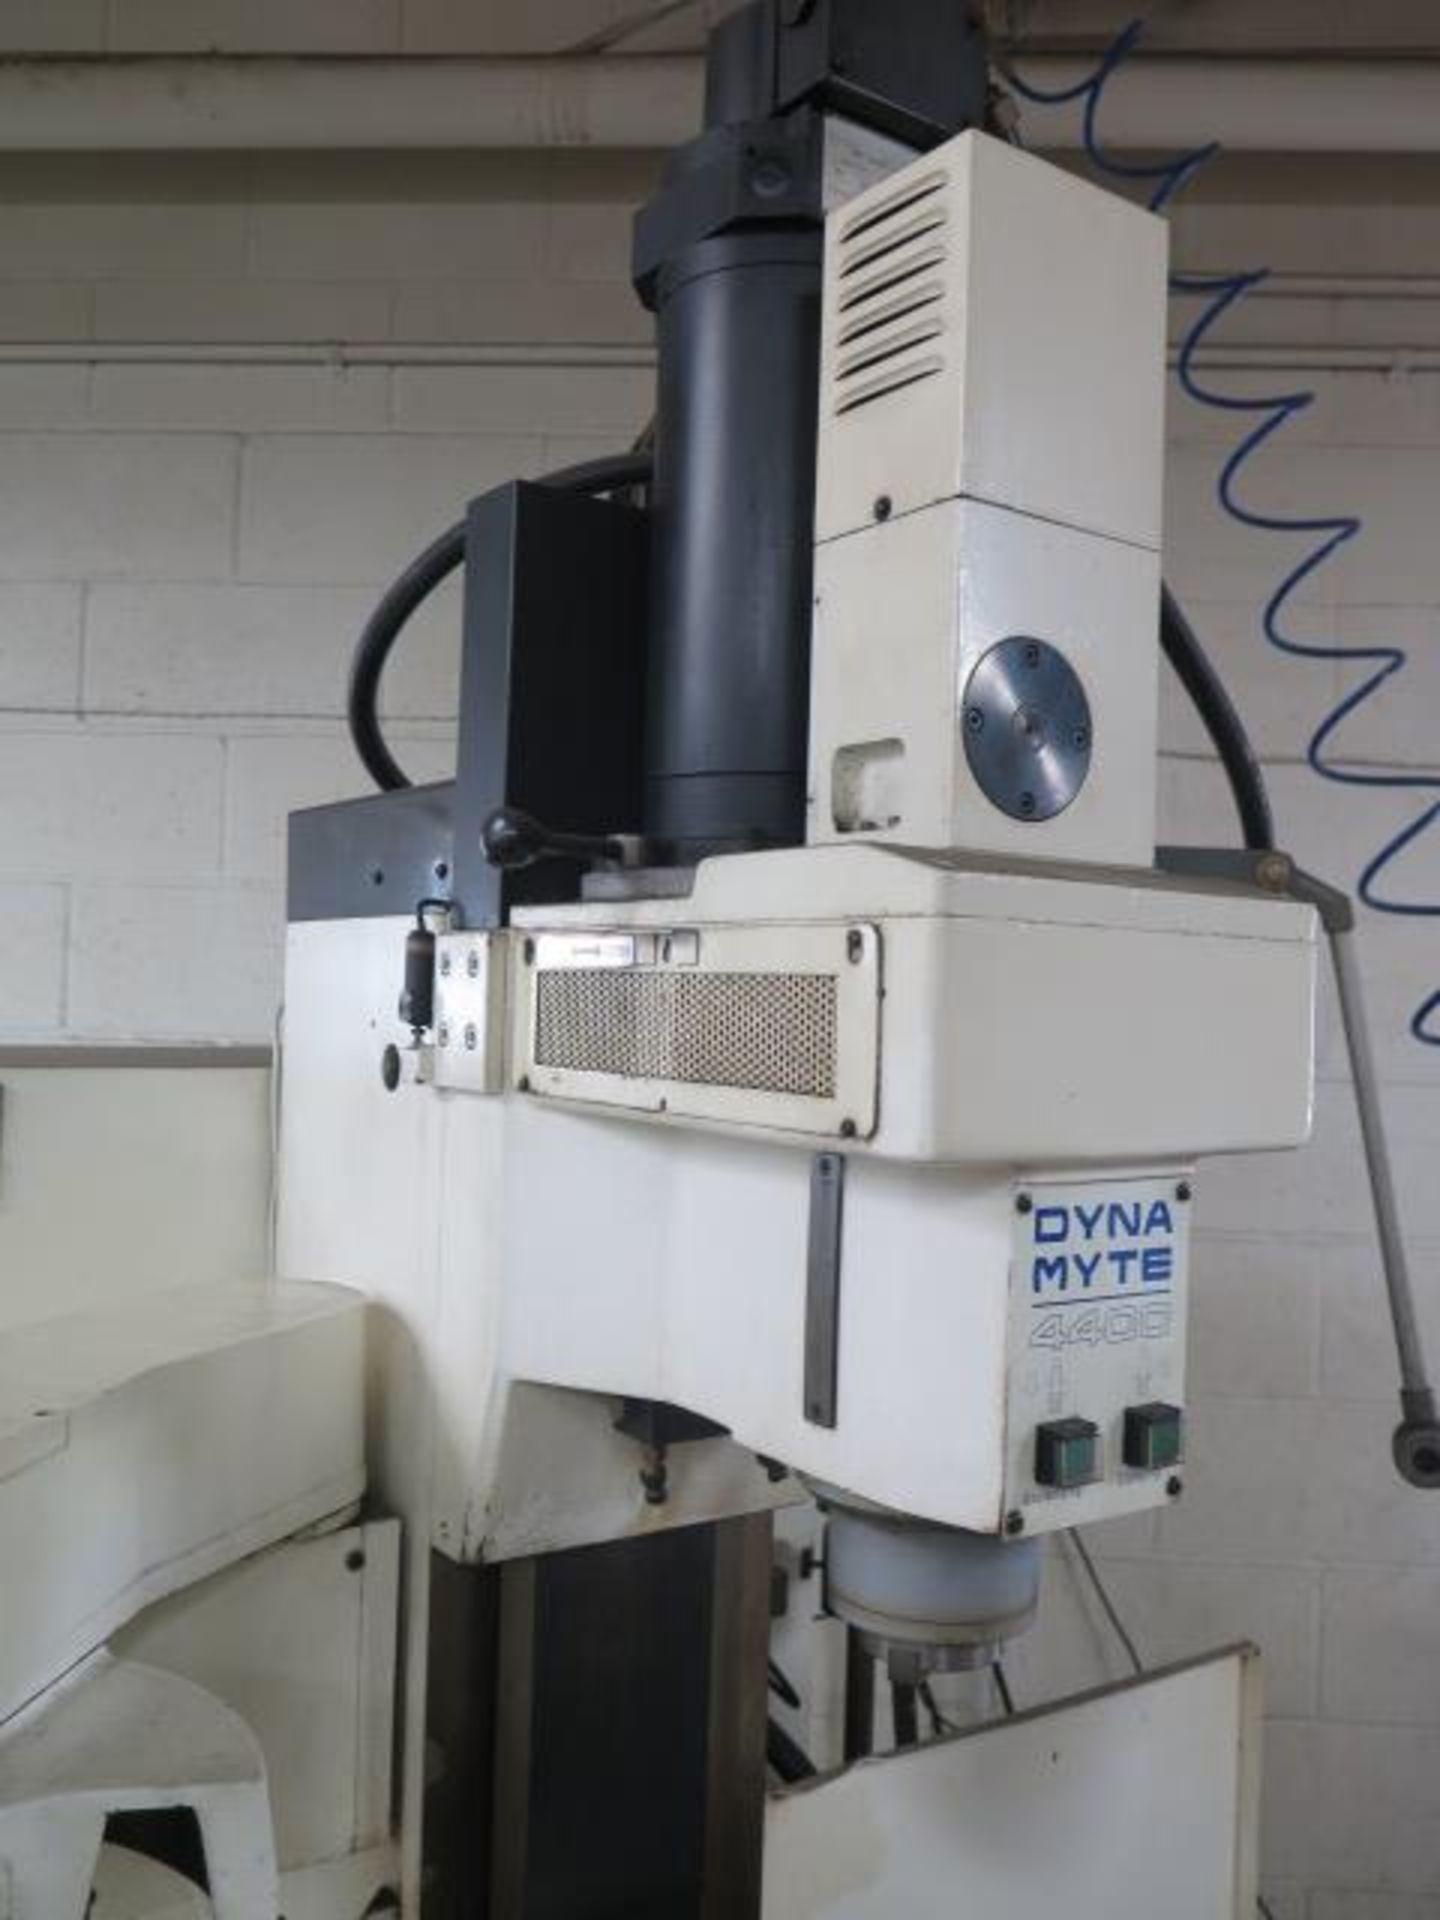 Dyna Myte 4400 CNC VMC w/ Dyna 44M Controls, 10-Station ATC, CAT-30 Taper, SOLD AS IS - Image 9 of 14